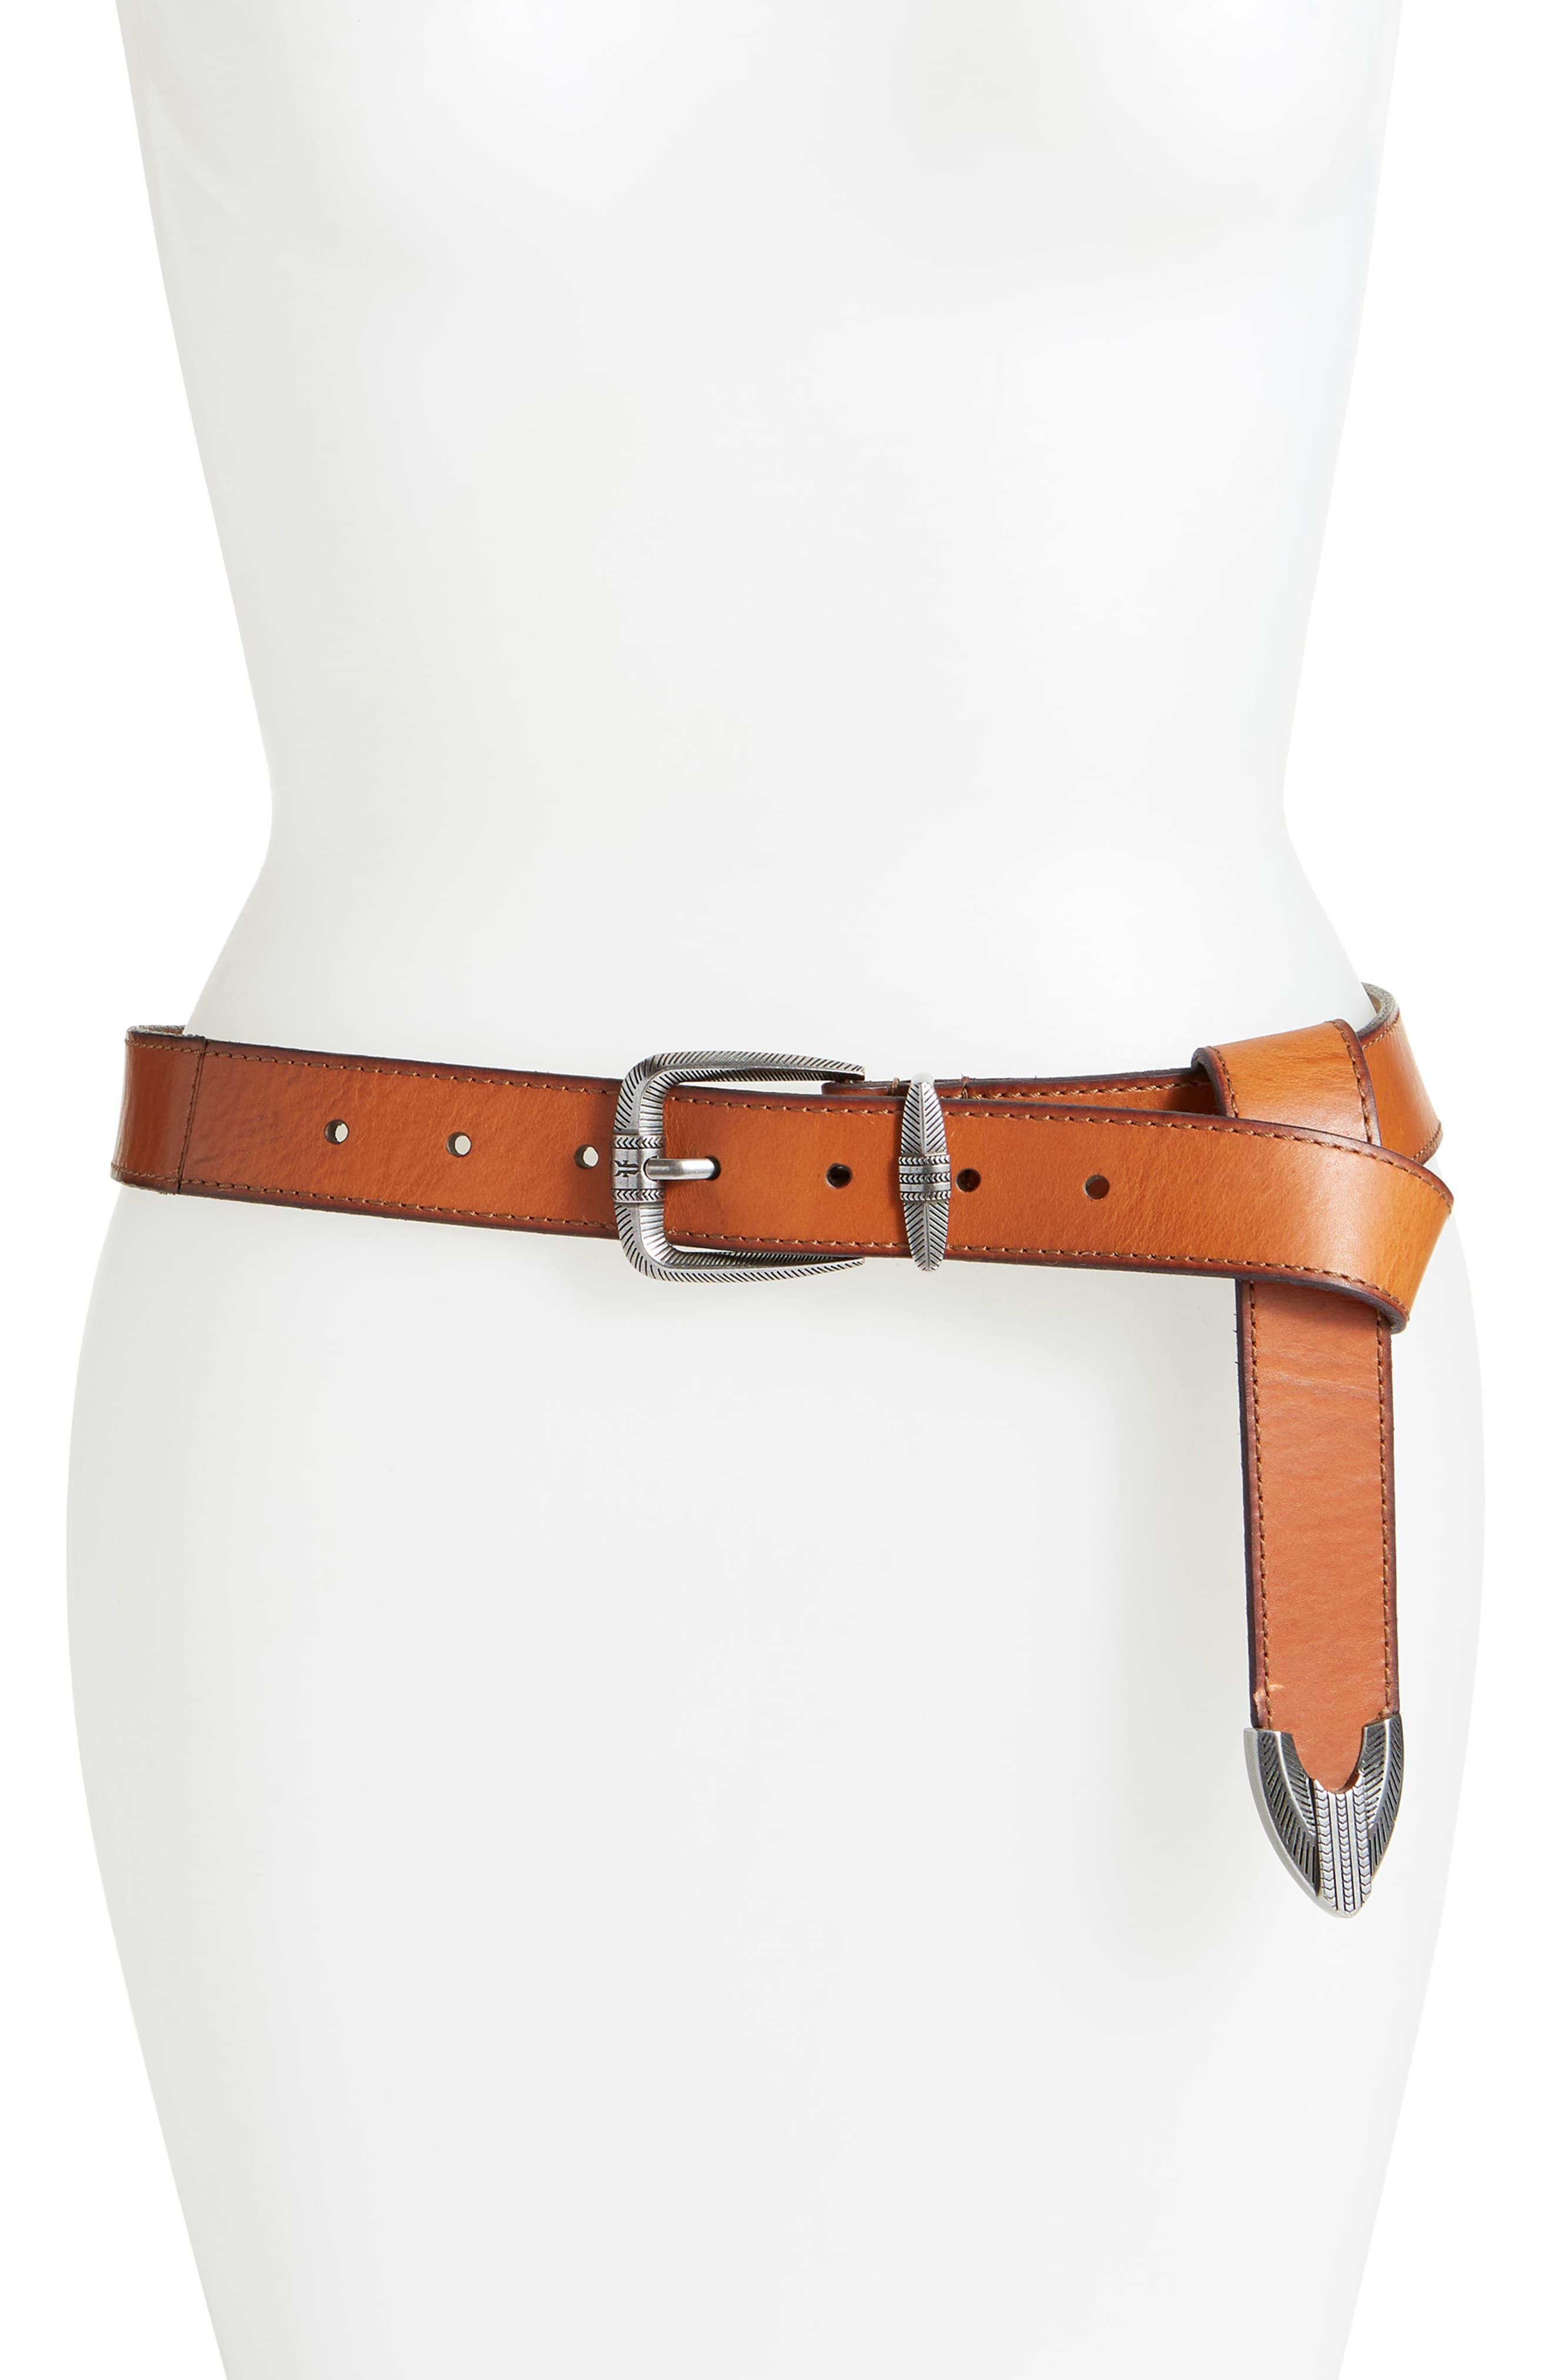 Frye Flat Panel Leather Belt in Tan (Brown) - Save 26% - Lyst